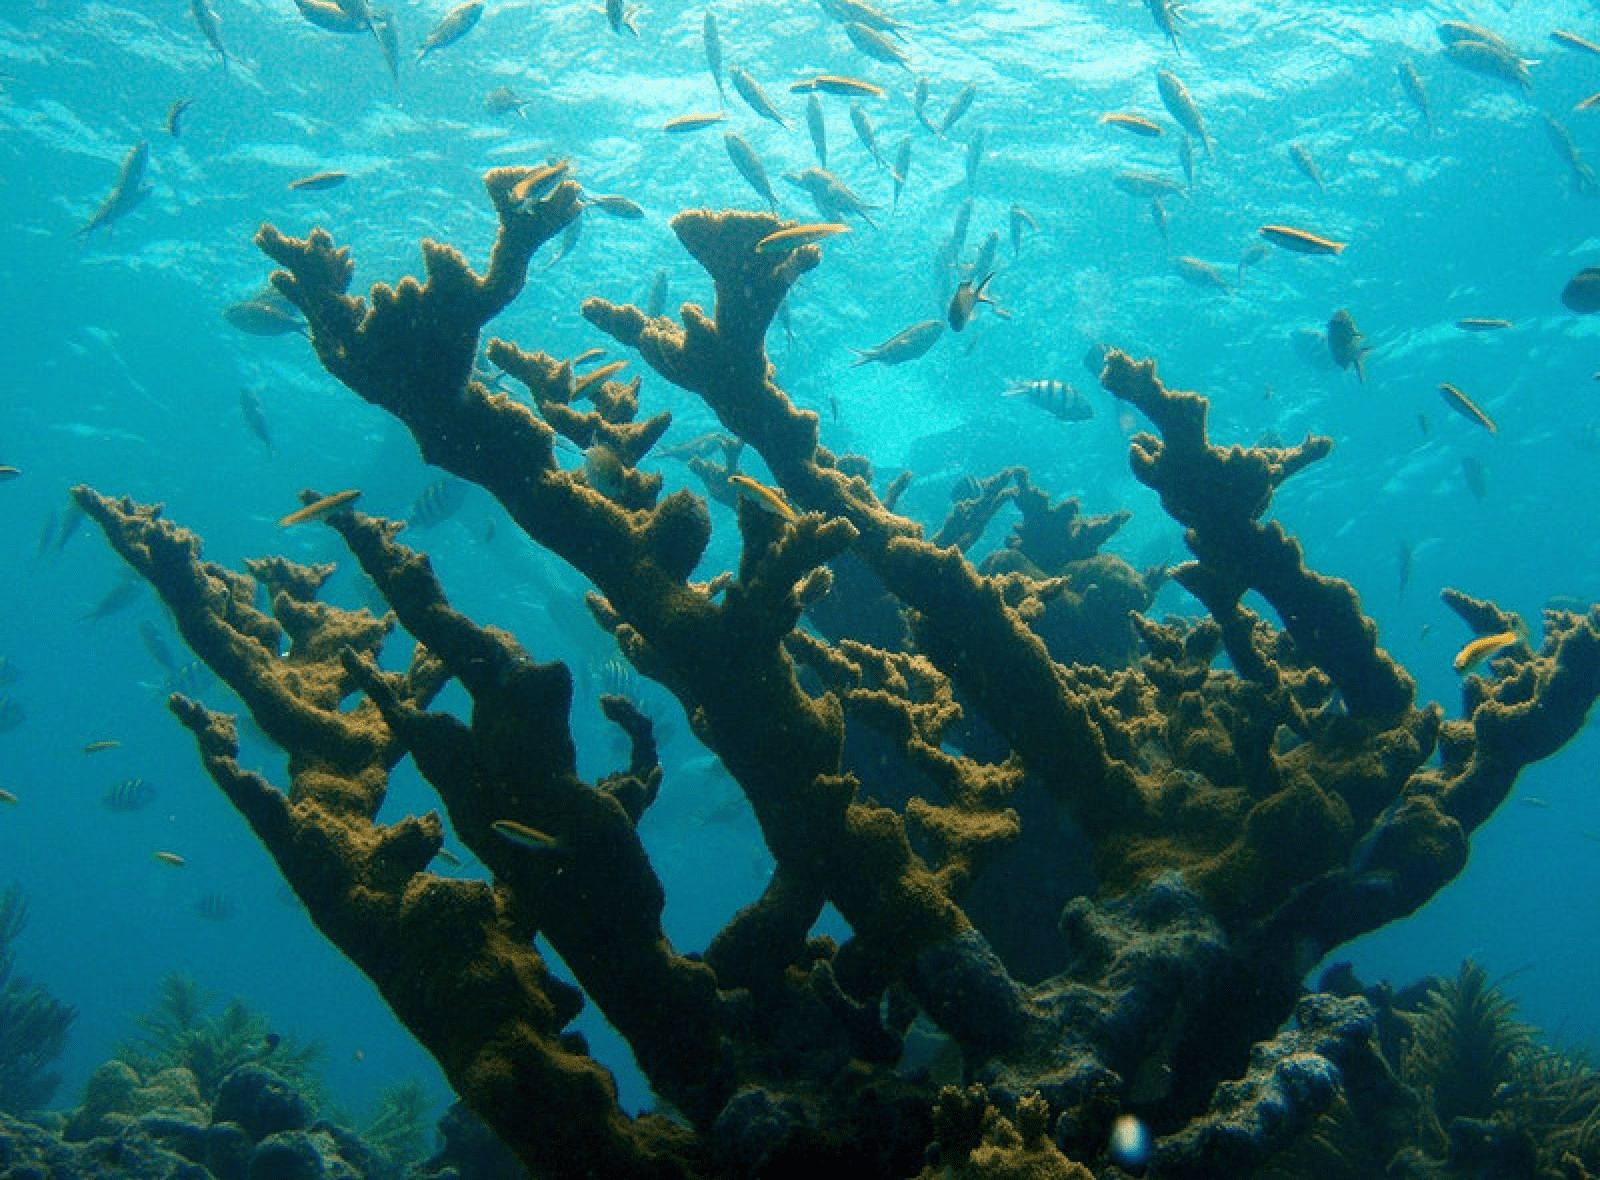 A large coral dazzles under the water's surface.